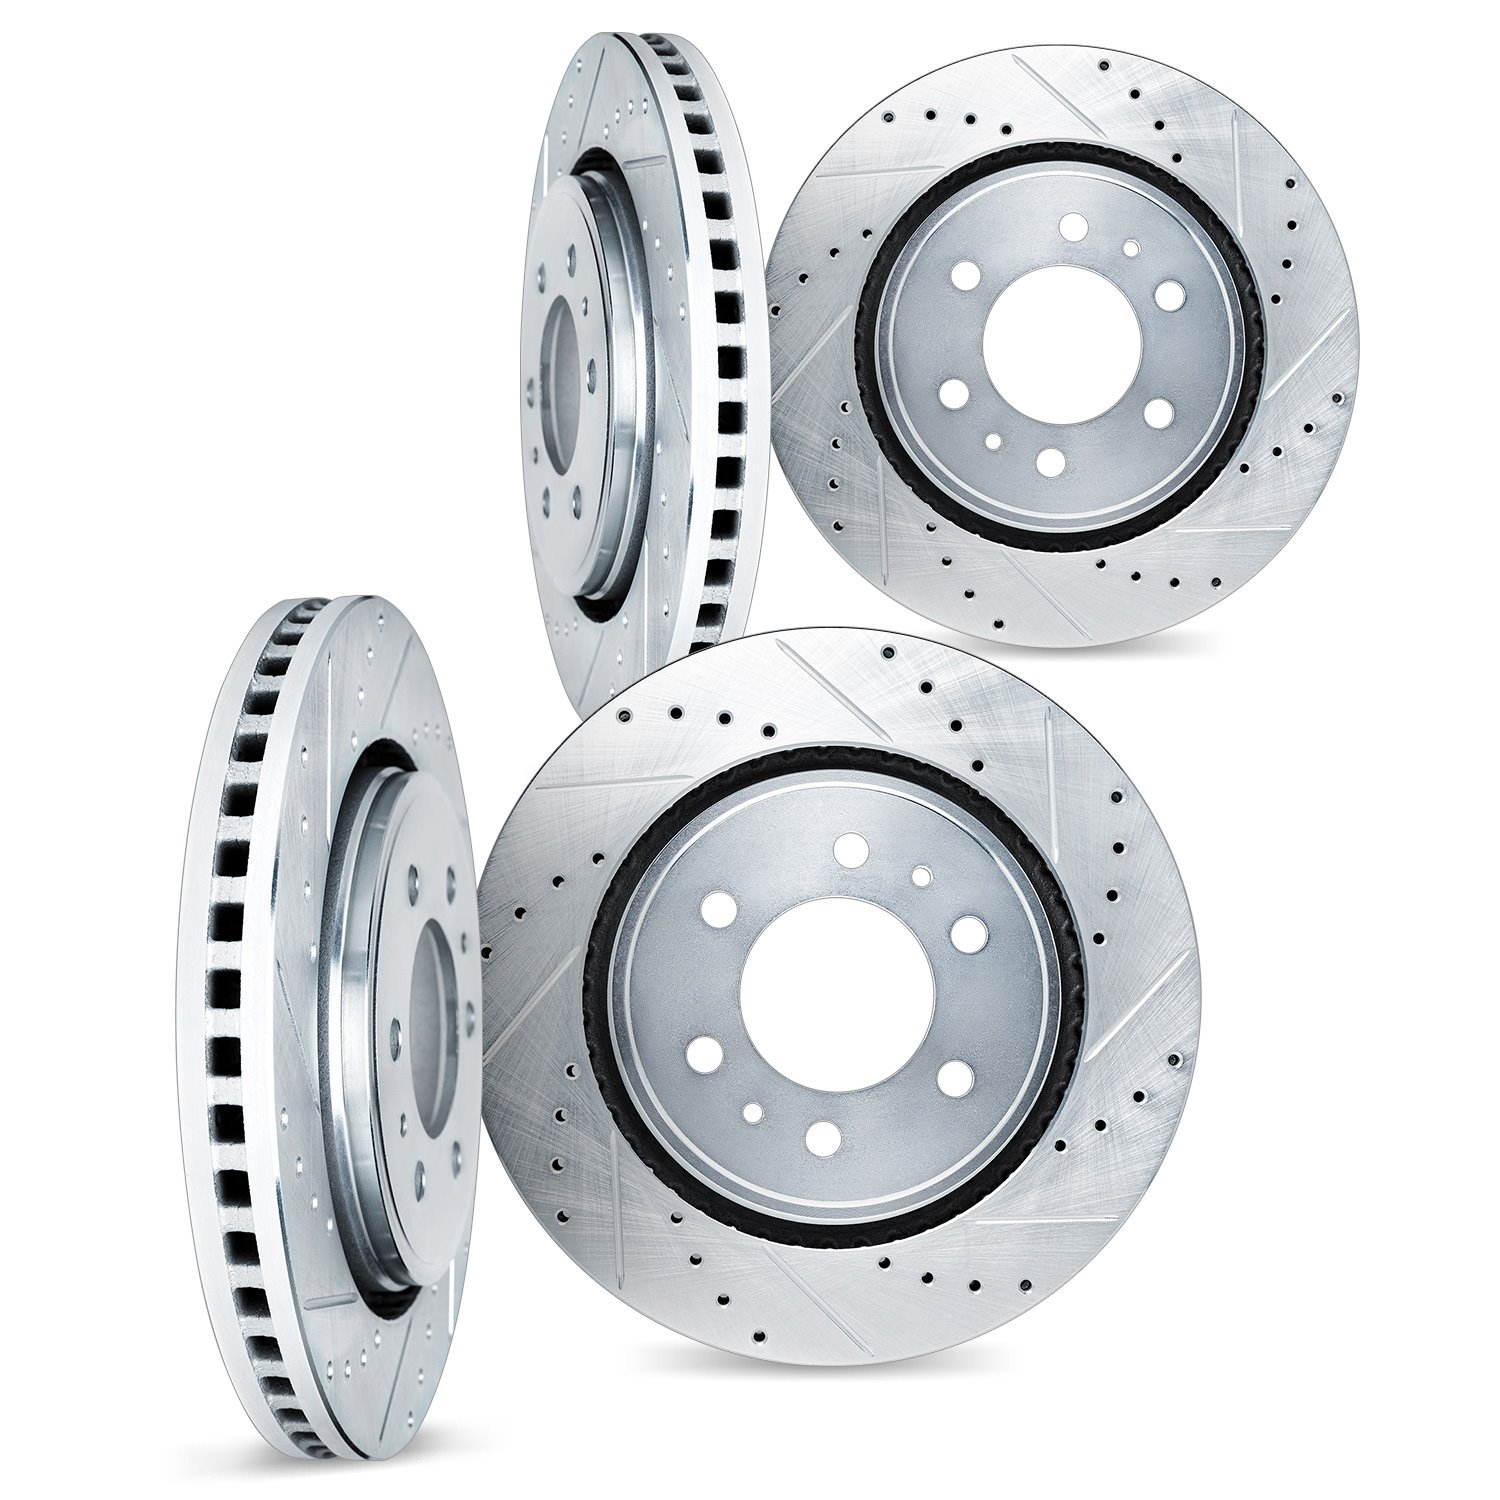 7004-47107 Drilled/Slotted Brake Rotors [Silver], Fits Select GM, Position: Front and Rear